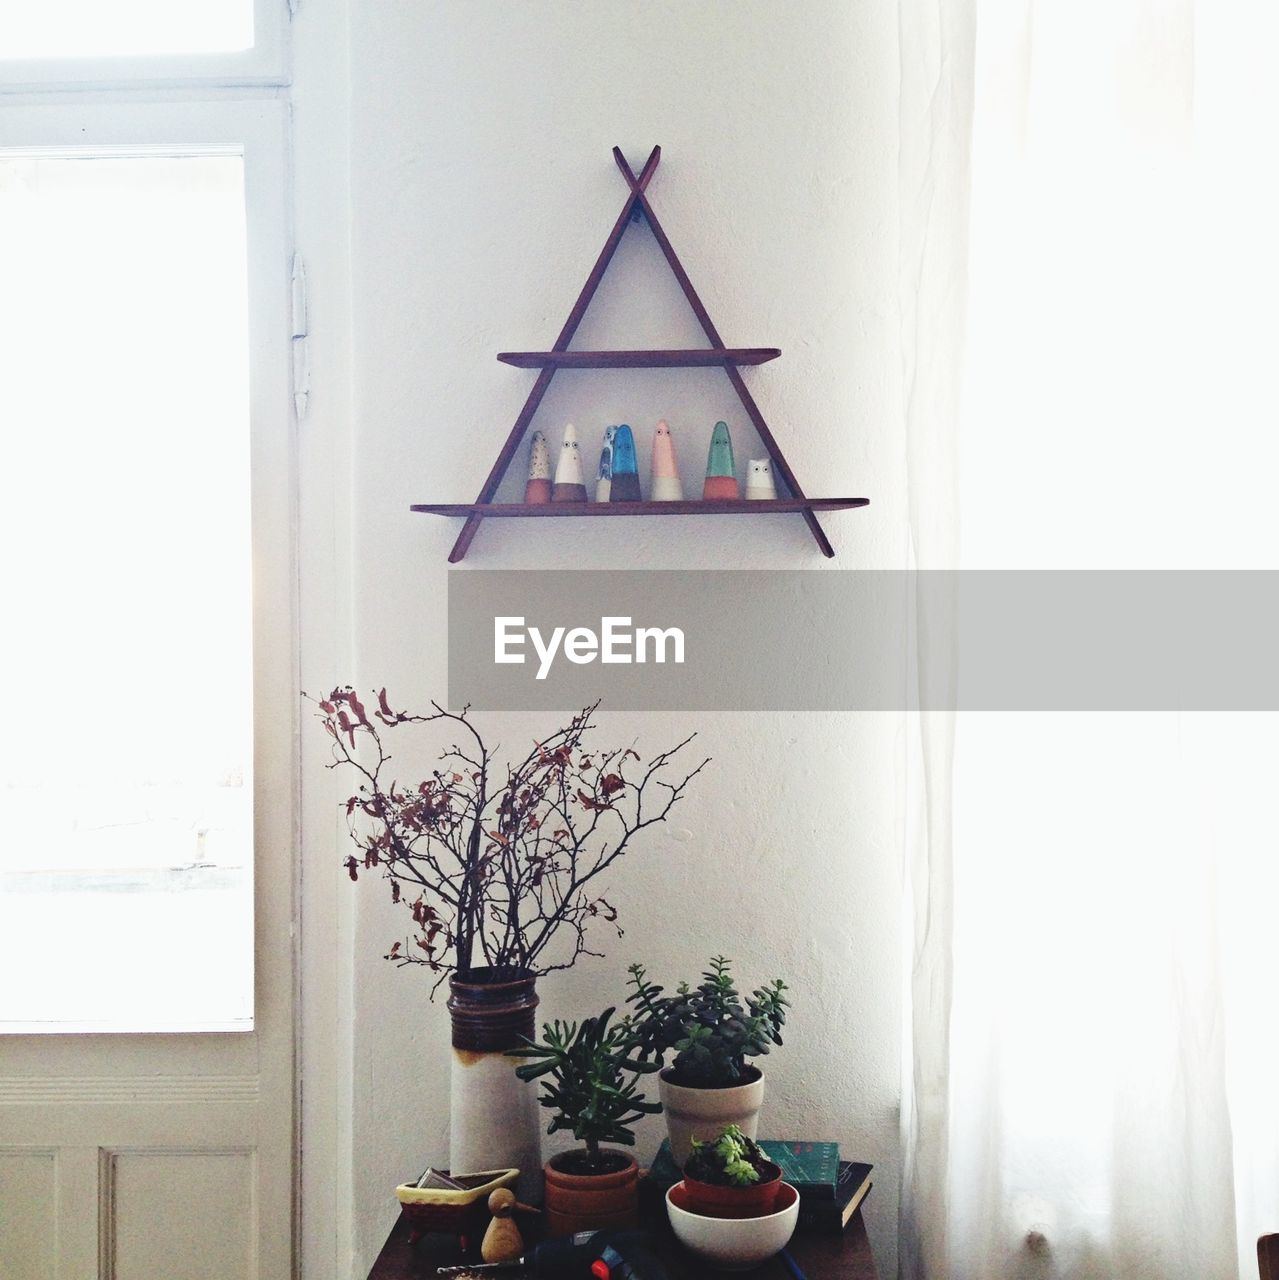 Potted plants on table against showpieces in triangular shelves